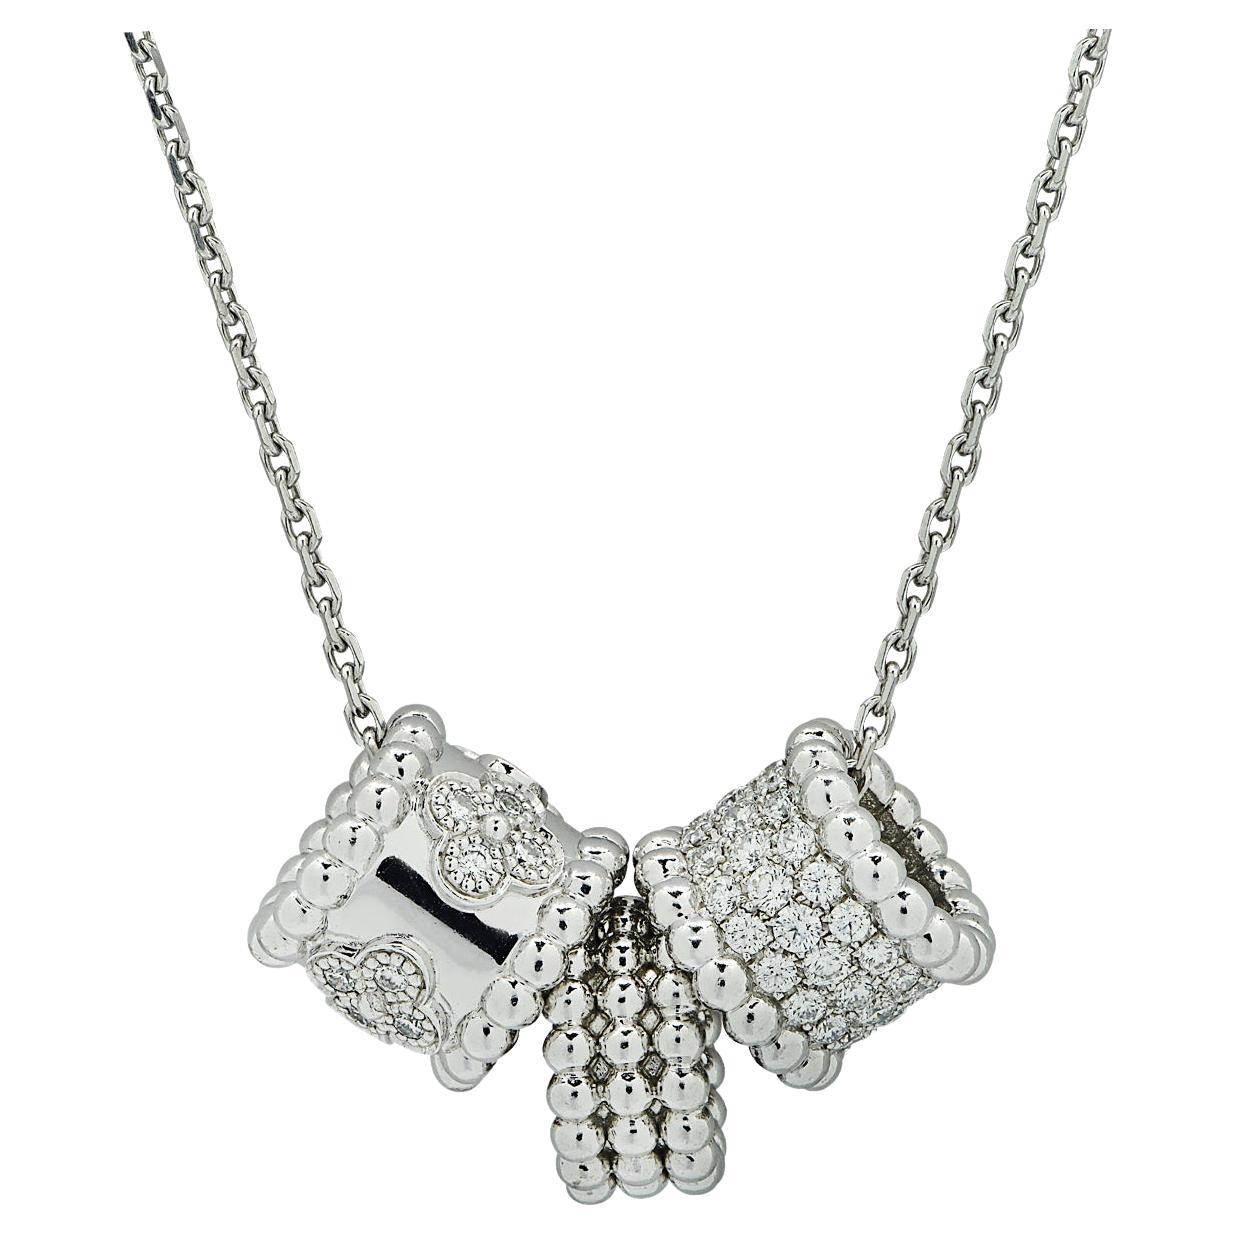 Van Cleef & Arpels White Gold Trace Chain Necklace and Perlée Pendants